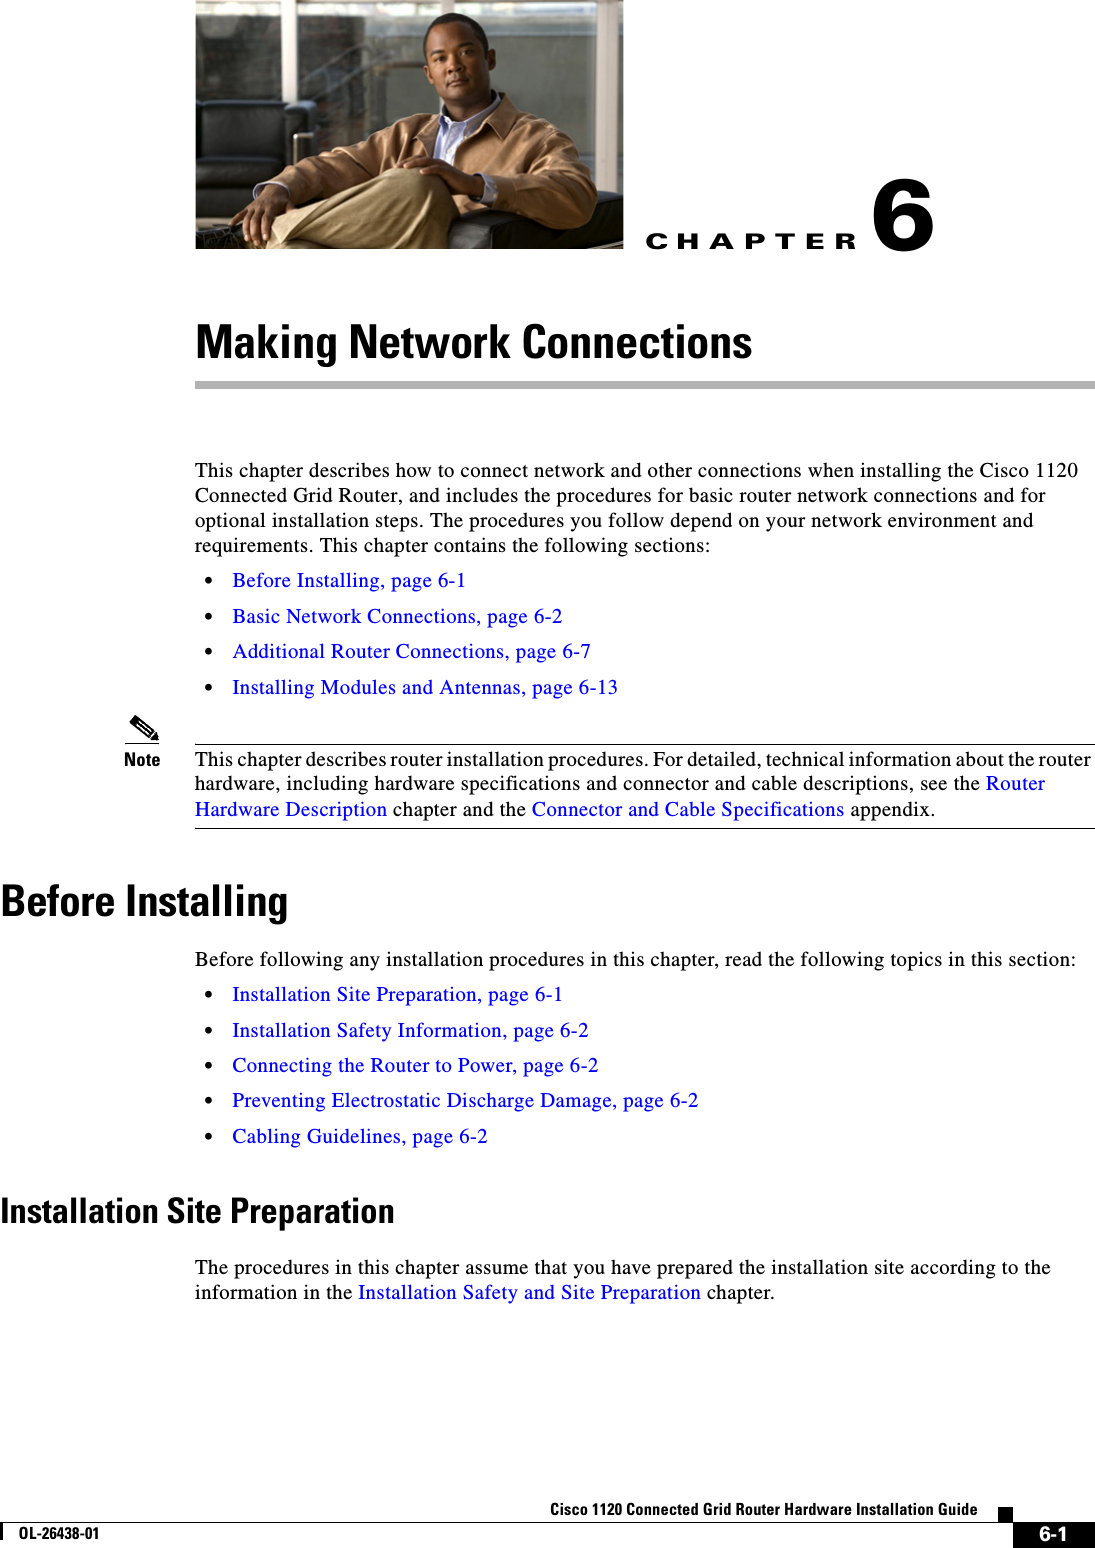 CHAPTER 6-1Cisco 1120 Connected Grid Router Hardware Installation GuideOL-26438-016Making Network ConnectionsThis chapter describes how to connect network and other connections when installing the Cisco 1120 Connected Grid Router, and includes the procedures for basic router network connections and for optional installation steps. The procedures you follow depend on your network environment and requirements. This chapter contains the following sections:•Before Installing, page 6-1•Basic Network Connections, page 6-2•Additional Router Connections, page 6-7•Installing Modules and Antennas, page 6-13Note This chapter describes router installation procedures. For detailed, technical information about the router hardware, including hardware specifications and connector and cable descriptions, see the Router Hardware Description chapter and the Connector and Cable Specifications appendix.Before InstallingBefore following any installation procedures in this chapter, read the following topics in this section:•Installation Site Preparation, page 6-1•Installation Safety Information, page 6-2•Connecting the Router to Power, page 6-2•Preventing Electrostatic Discharge Damage, page 6-2•Cabling Guidelines, page 6-2Installation Site PreparationThe procedures in this chapter assume that you have prepared the installation site according to the information in the Installation Safety and Site Preparation chapter.